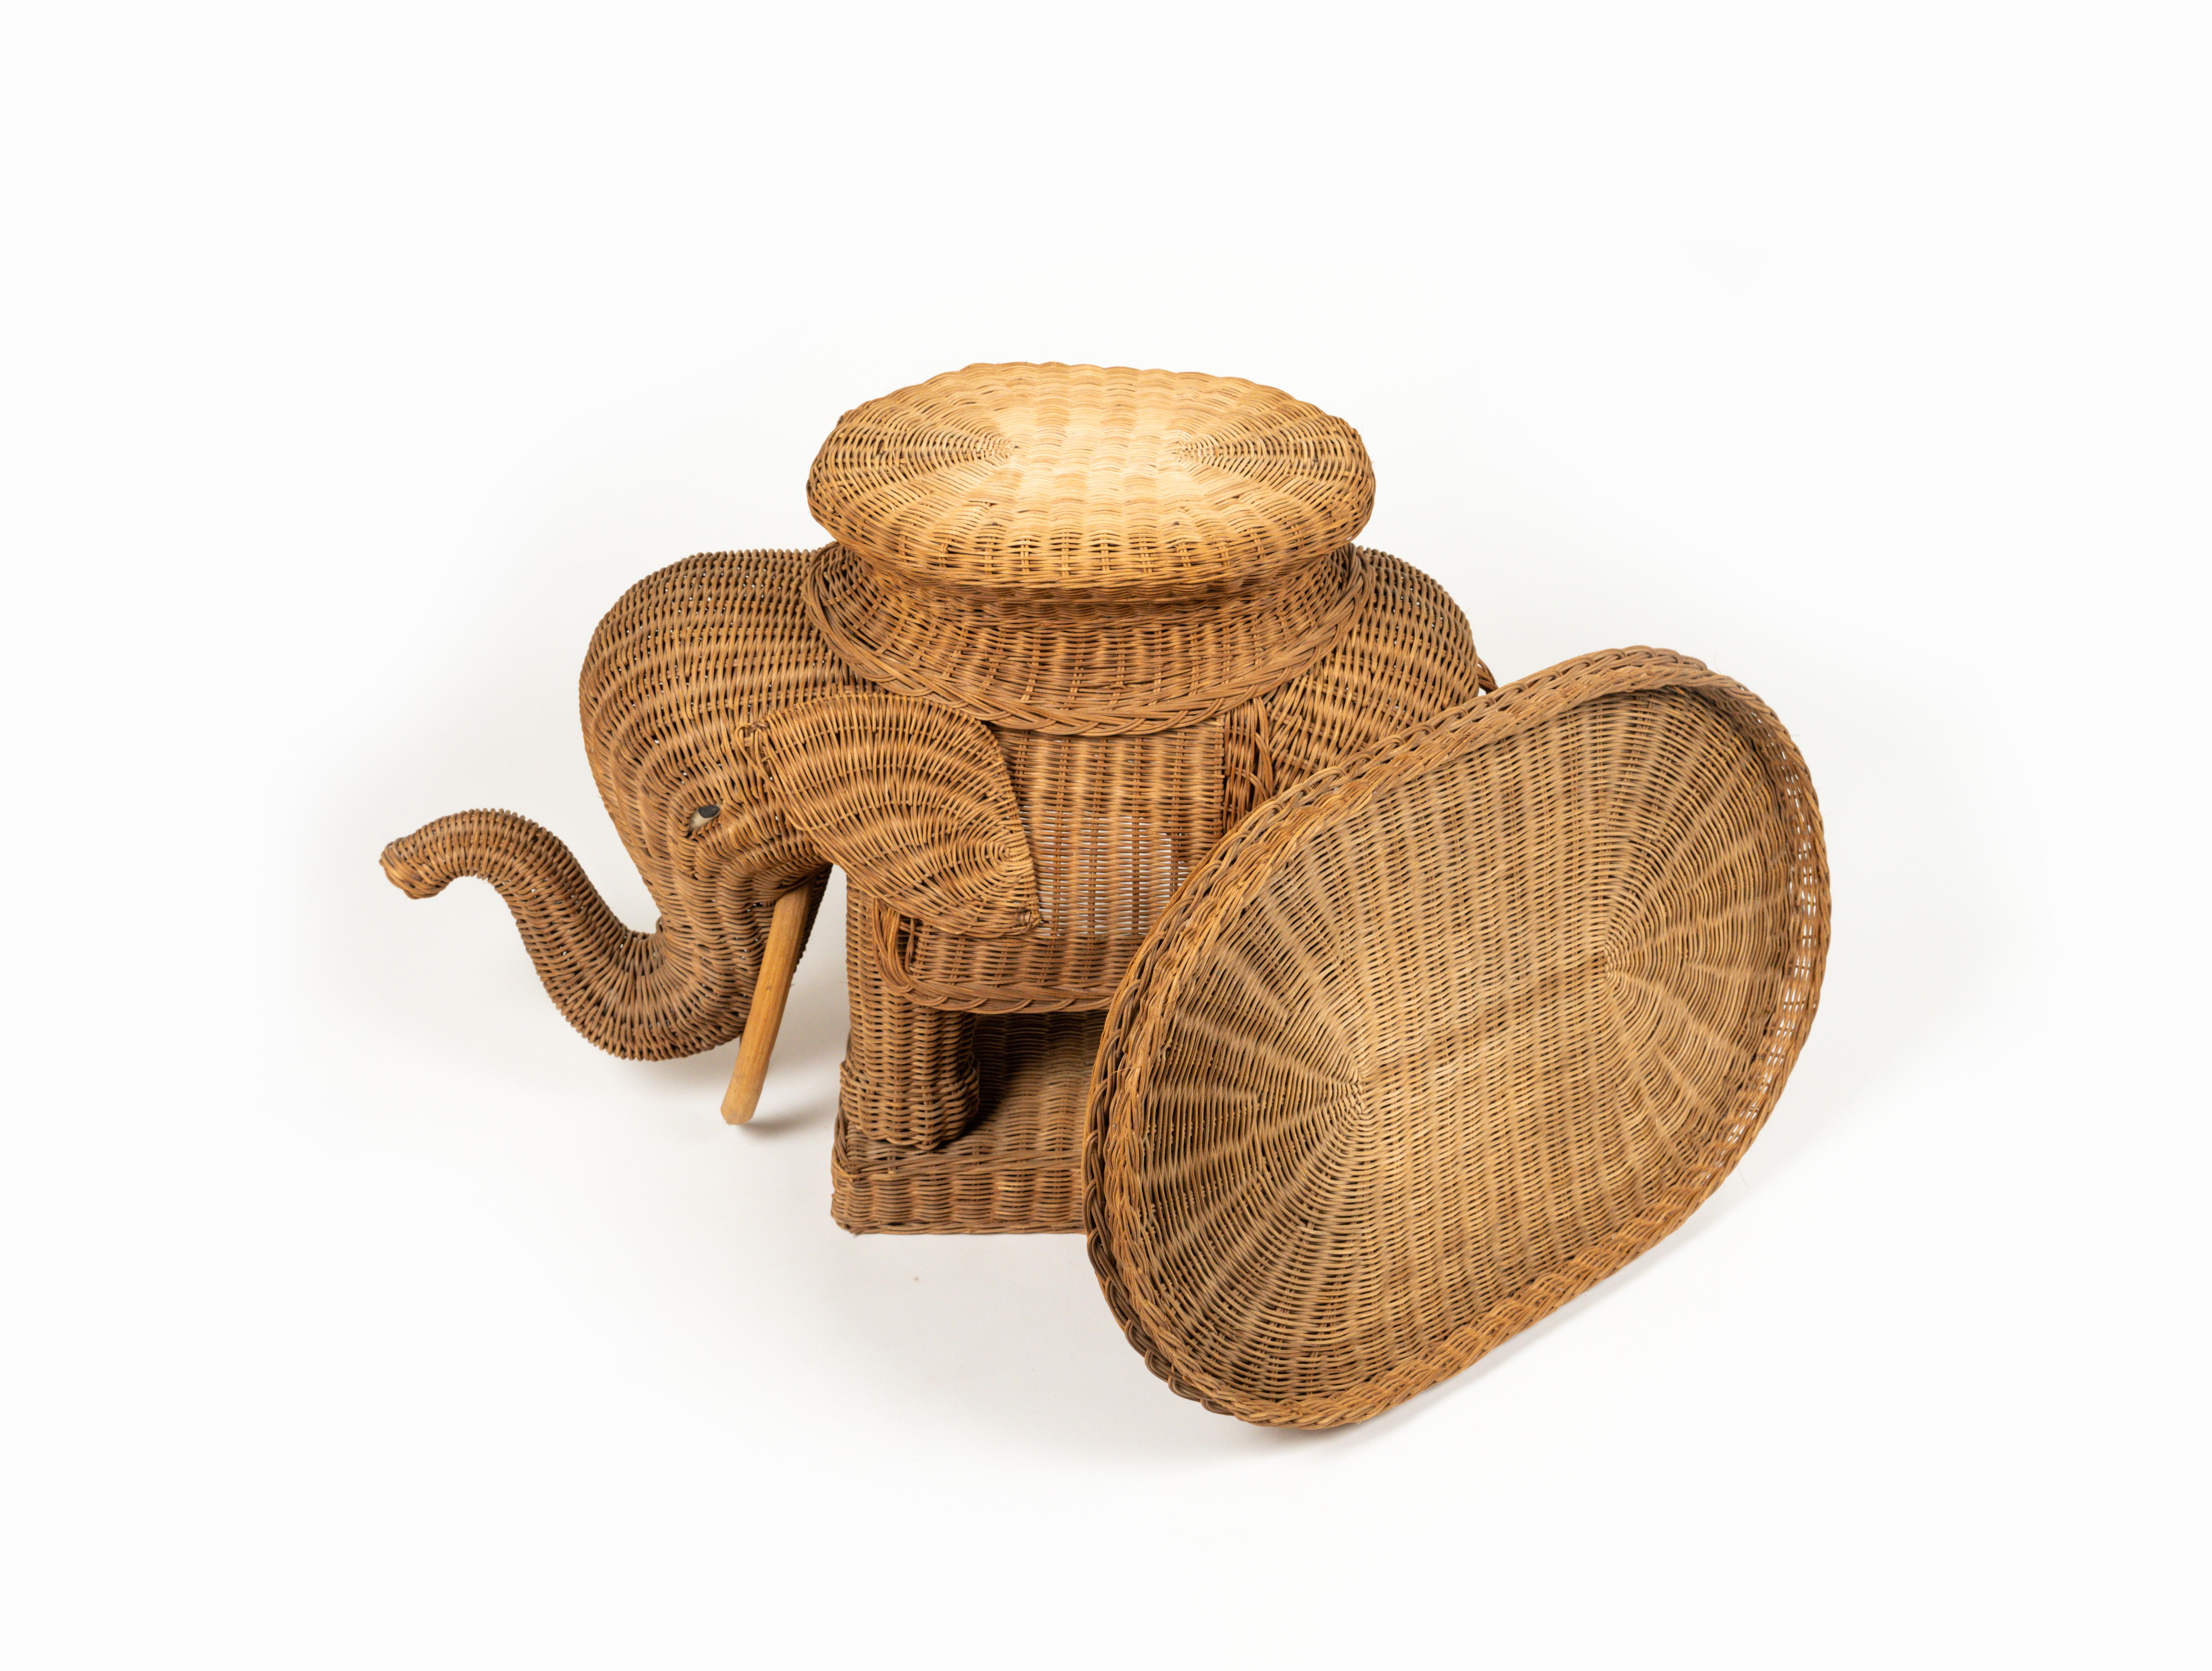 Rattan & Wicker Elephant Side Coffee Table Vivai Del Sud Style, Italy, 1960s For Sale 2